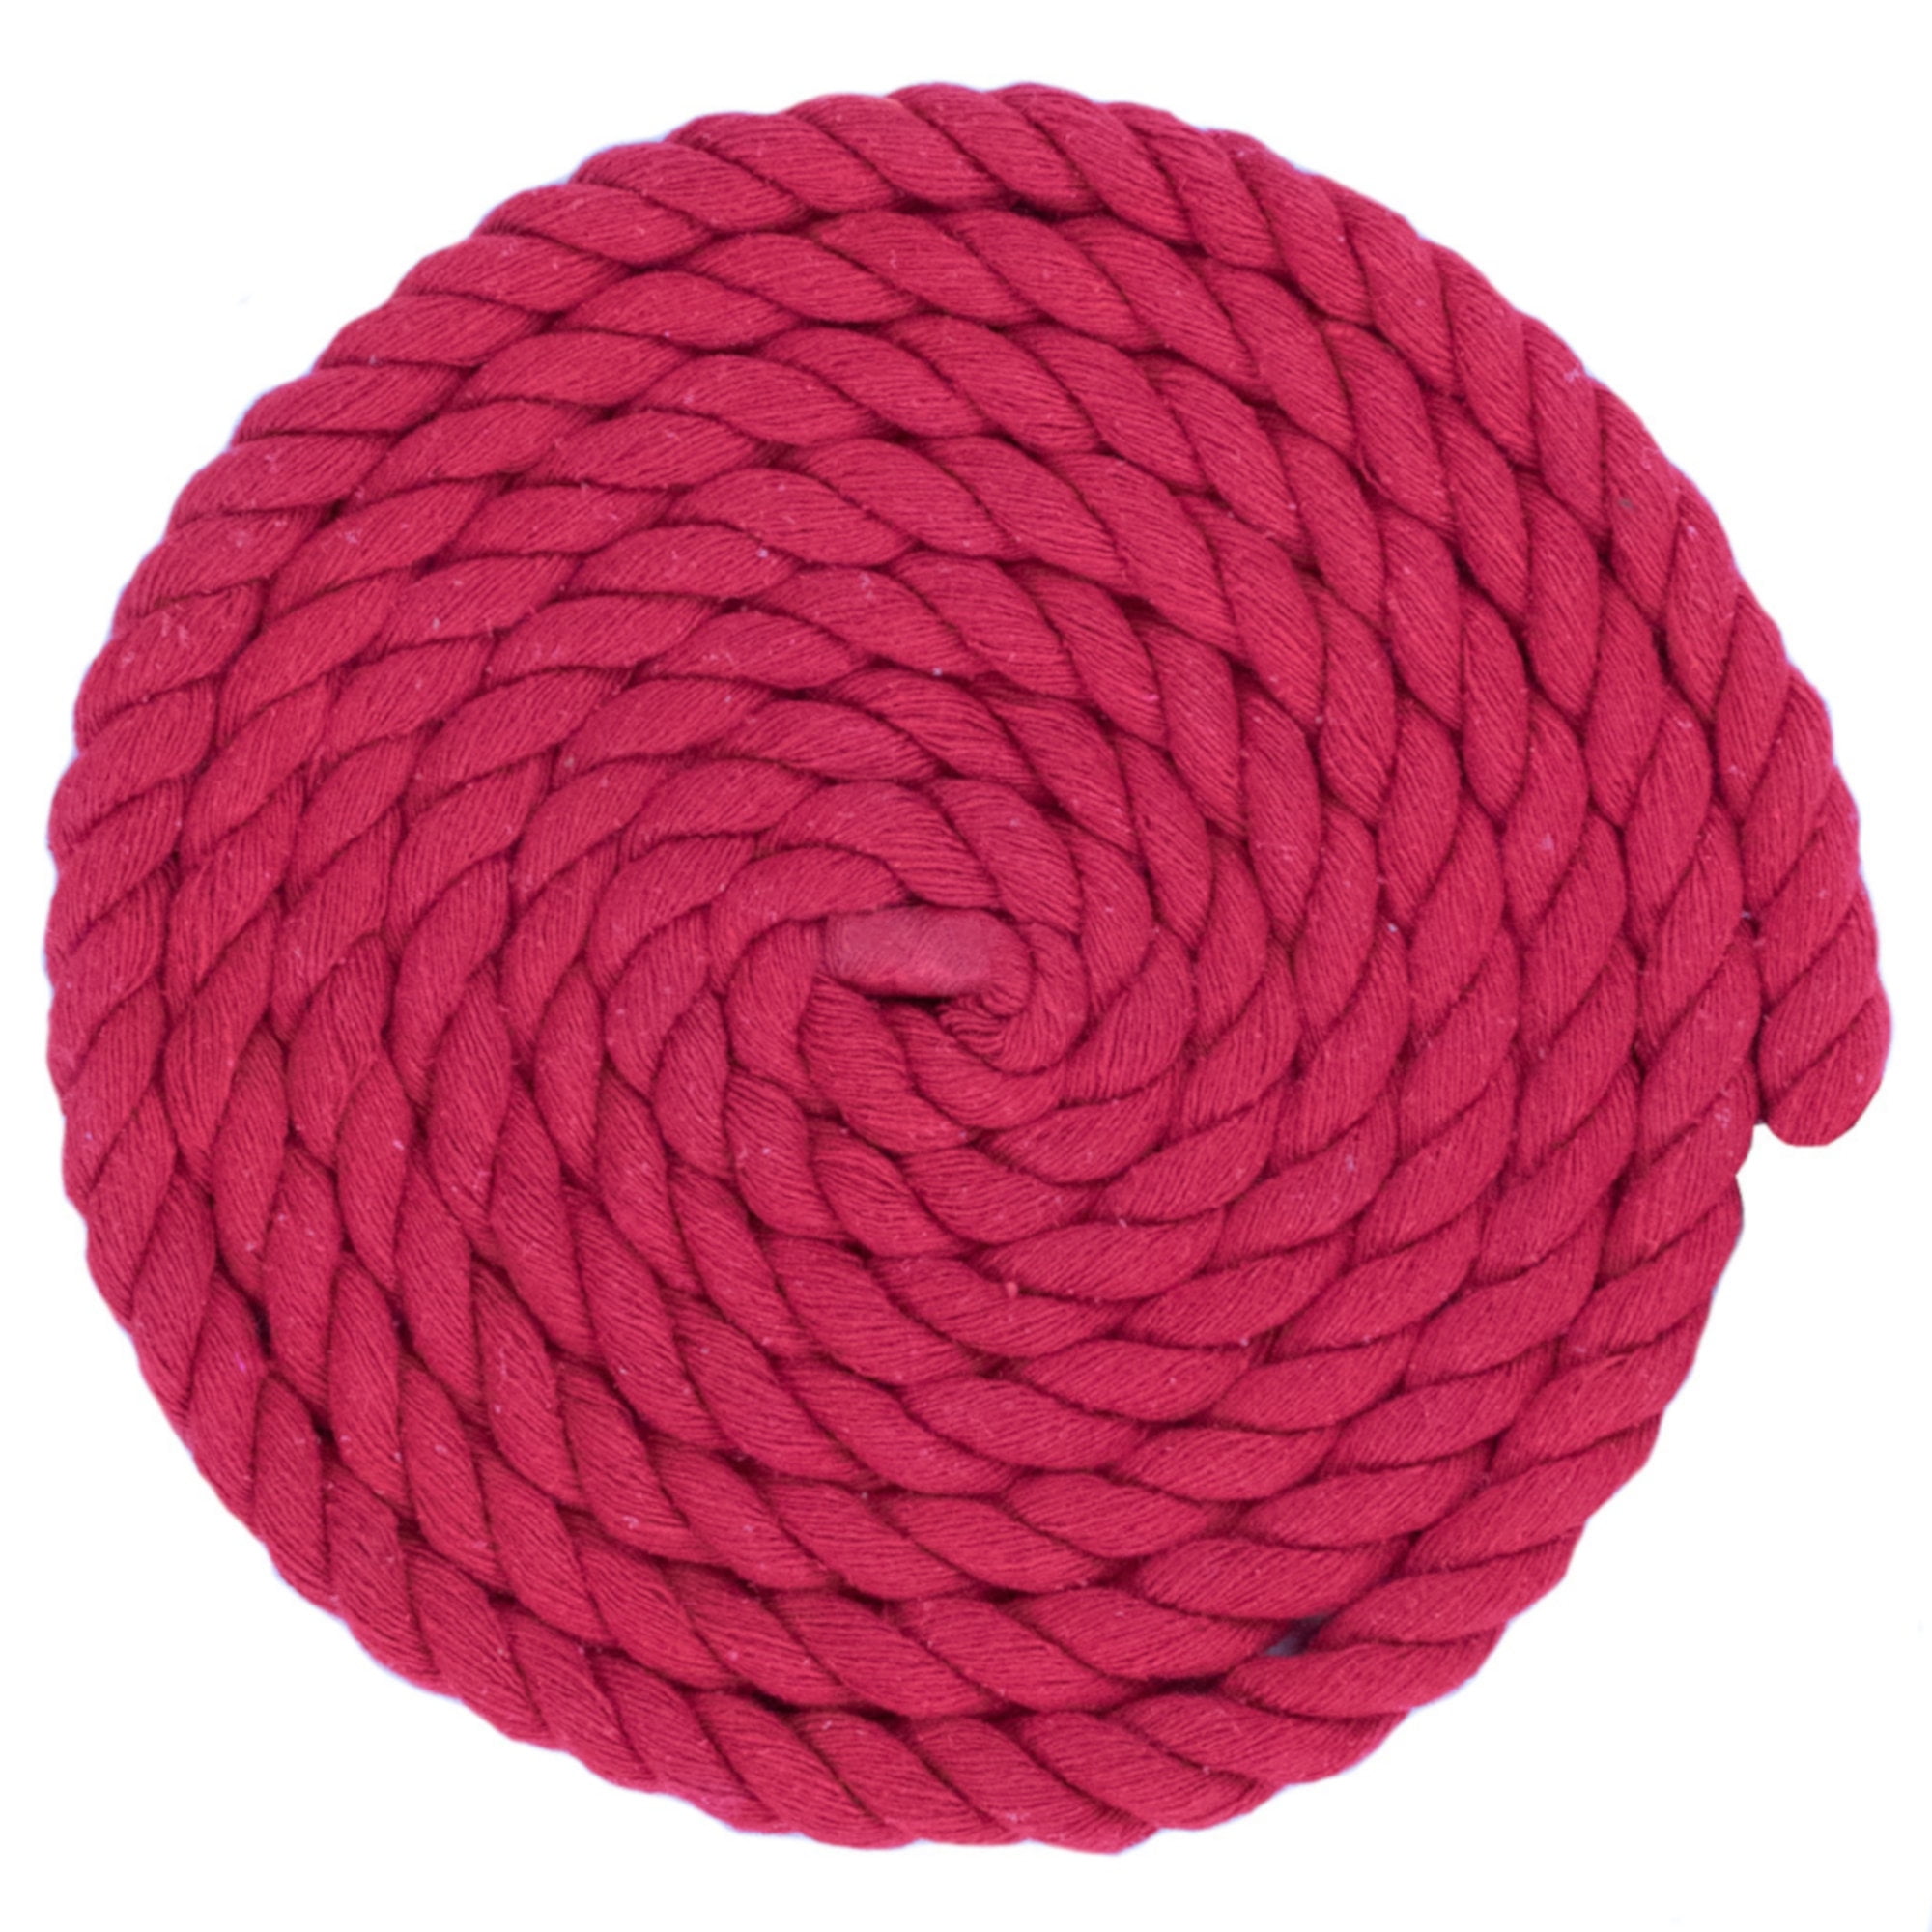 WCP 1/2 Inch Thick Super Soft Artisan Decorative Twisted 100% Cotton Rope -  Red 